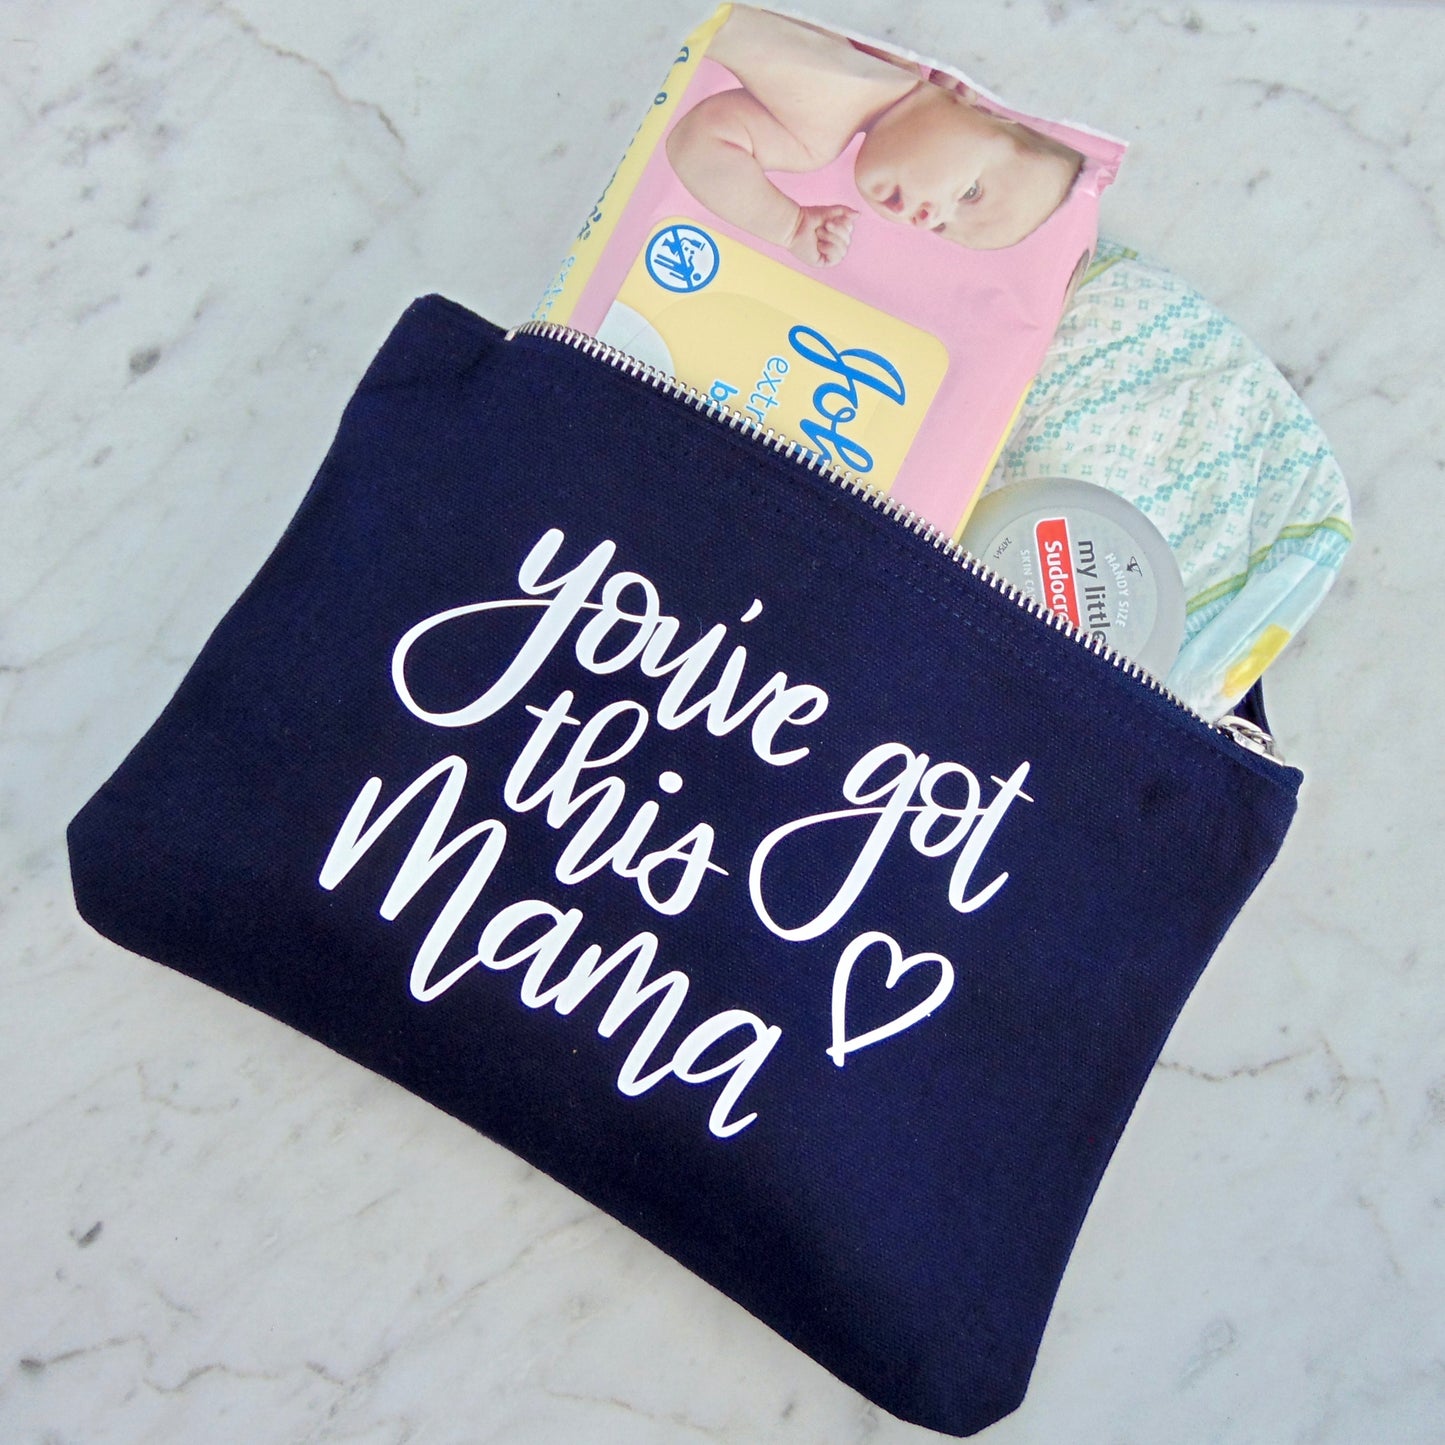 You've Got This Mama Navy Zip Pouch